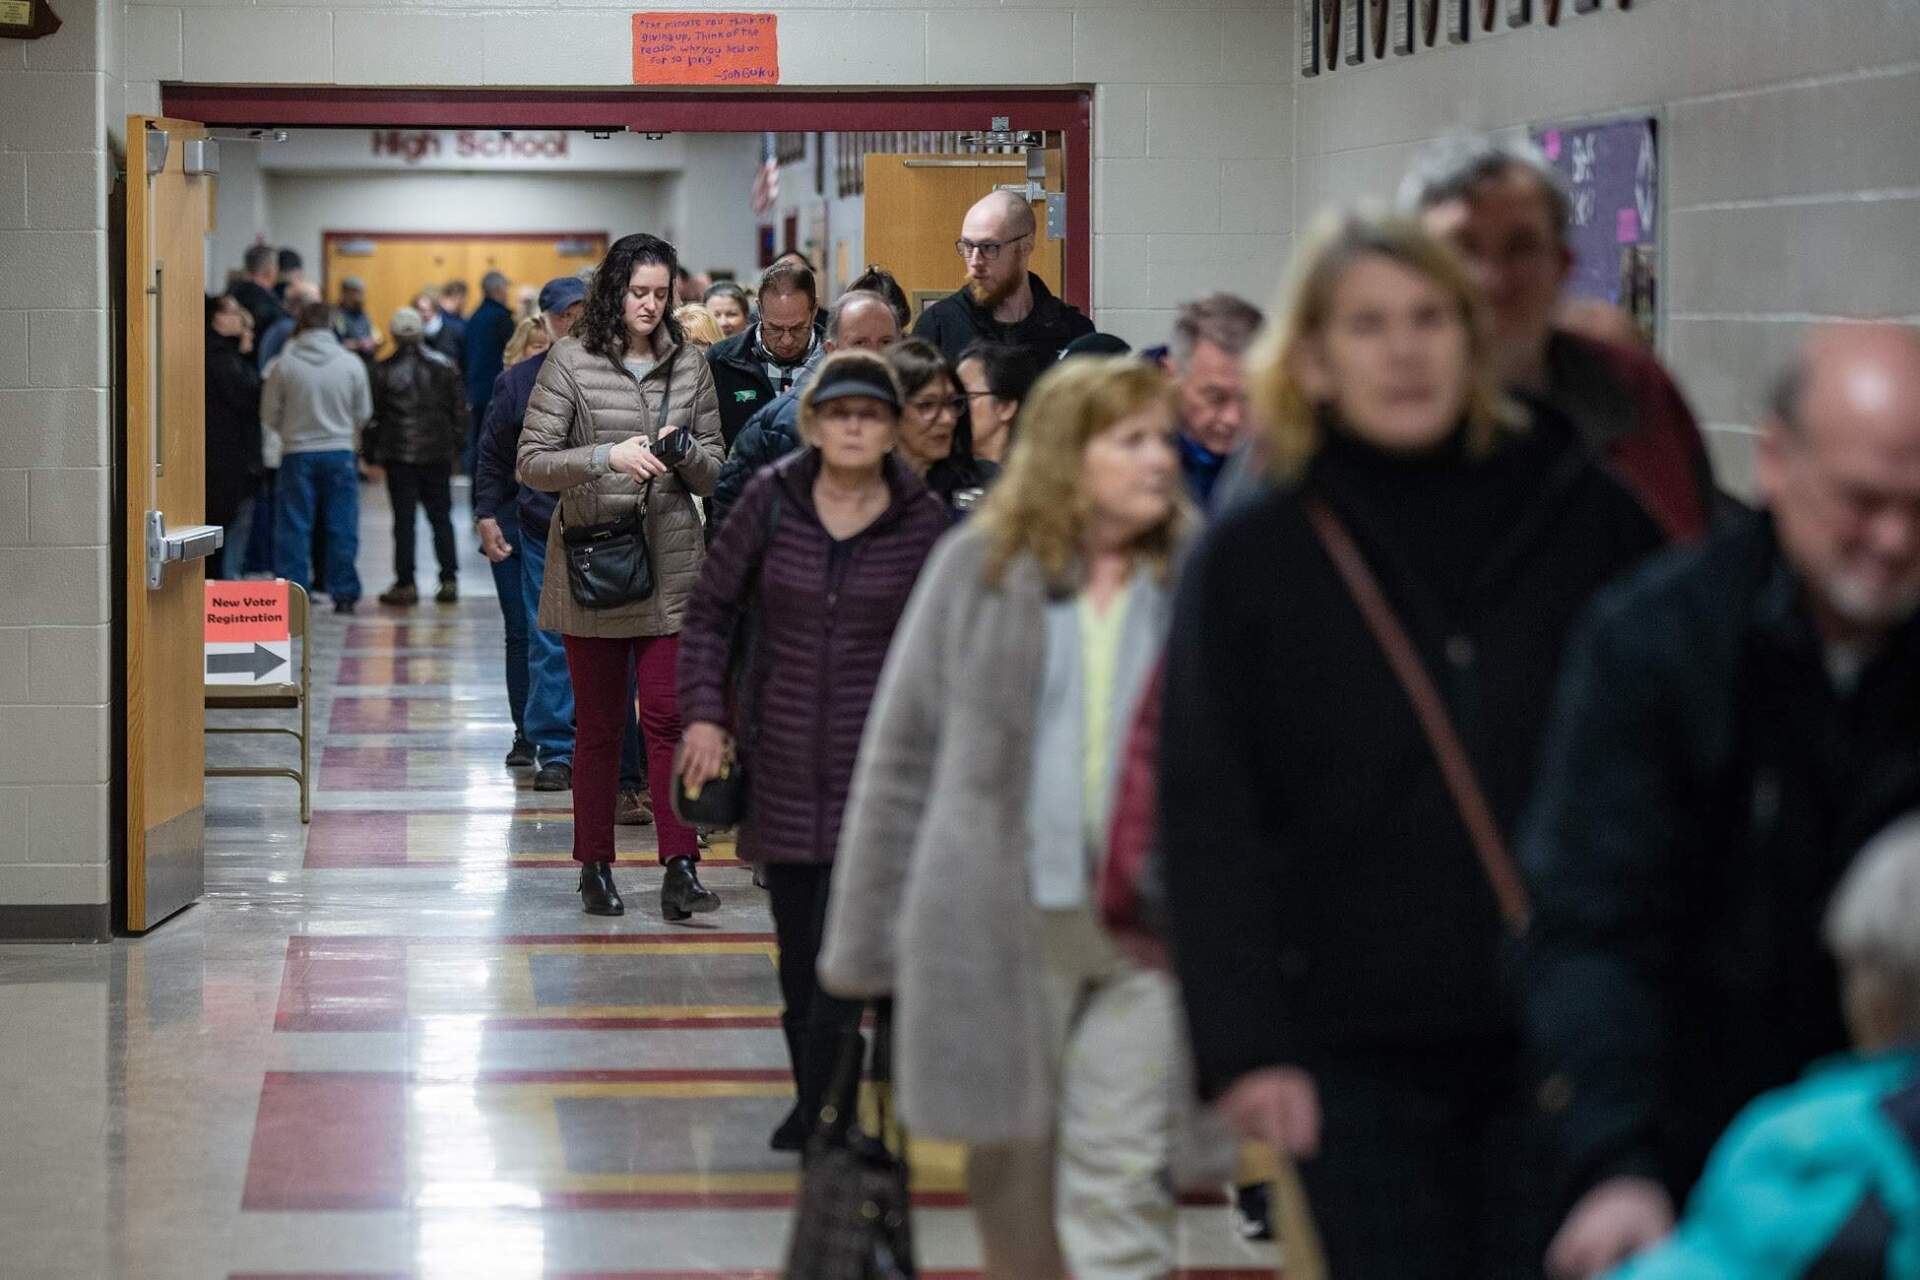 New Hampshire voters line up in a hallway of Bedford High School as the polls open in the morning on Tuesday. (Jesse Costa/WBUR)